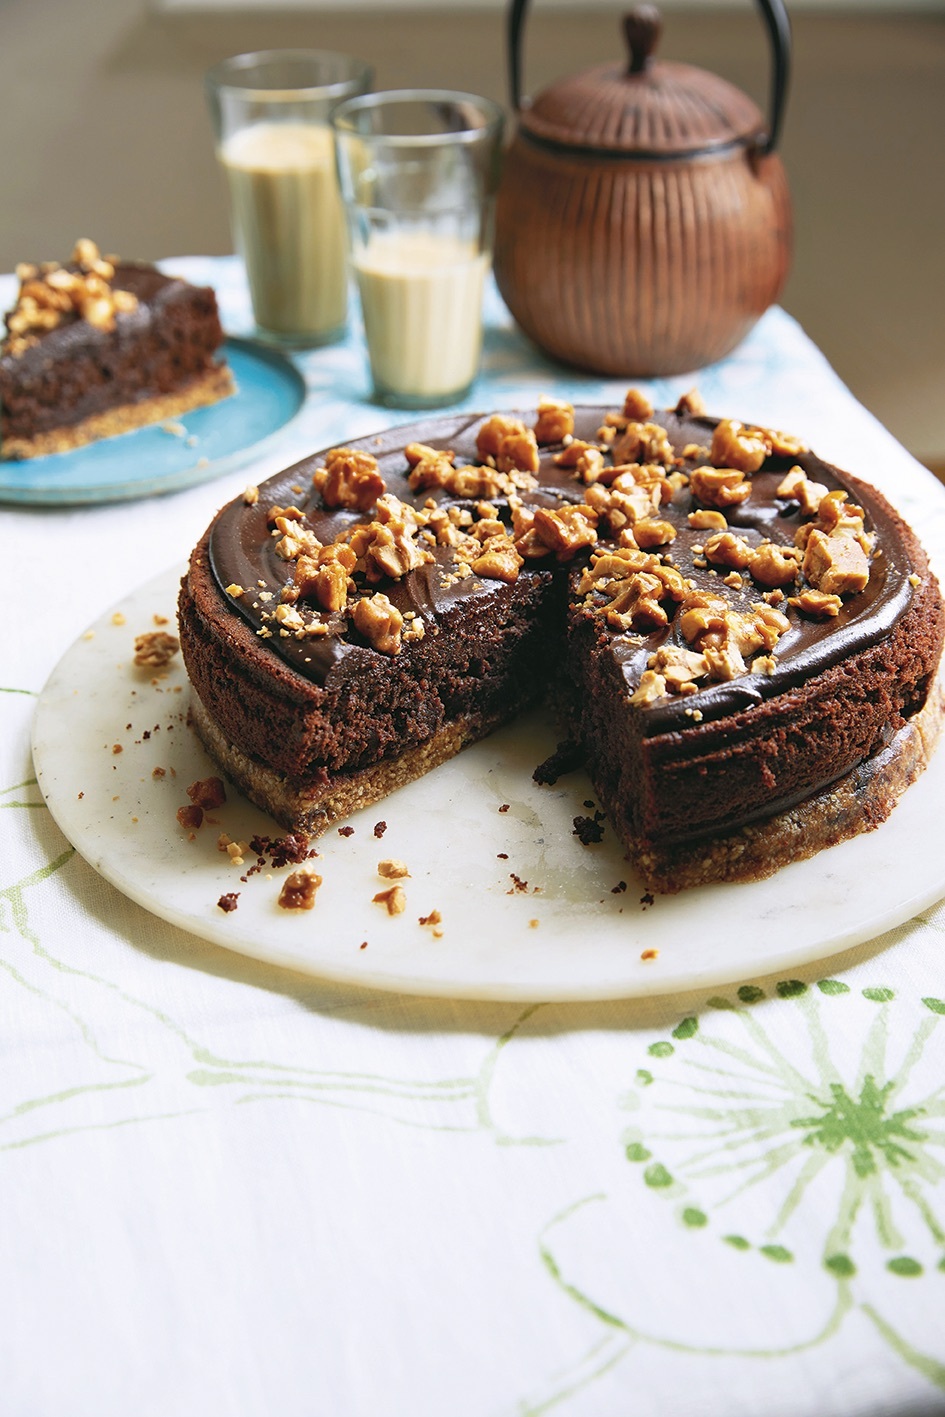 Candied Peanut Butter Chocolate Cake Africana image credit Tara Fisher